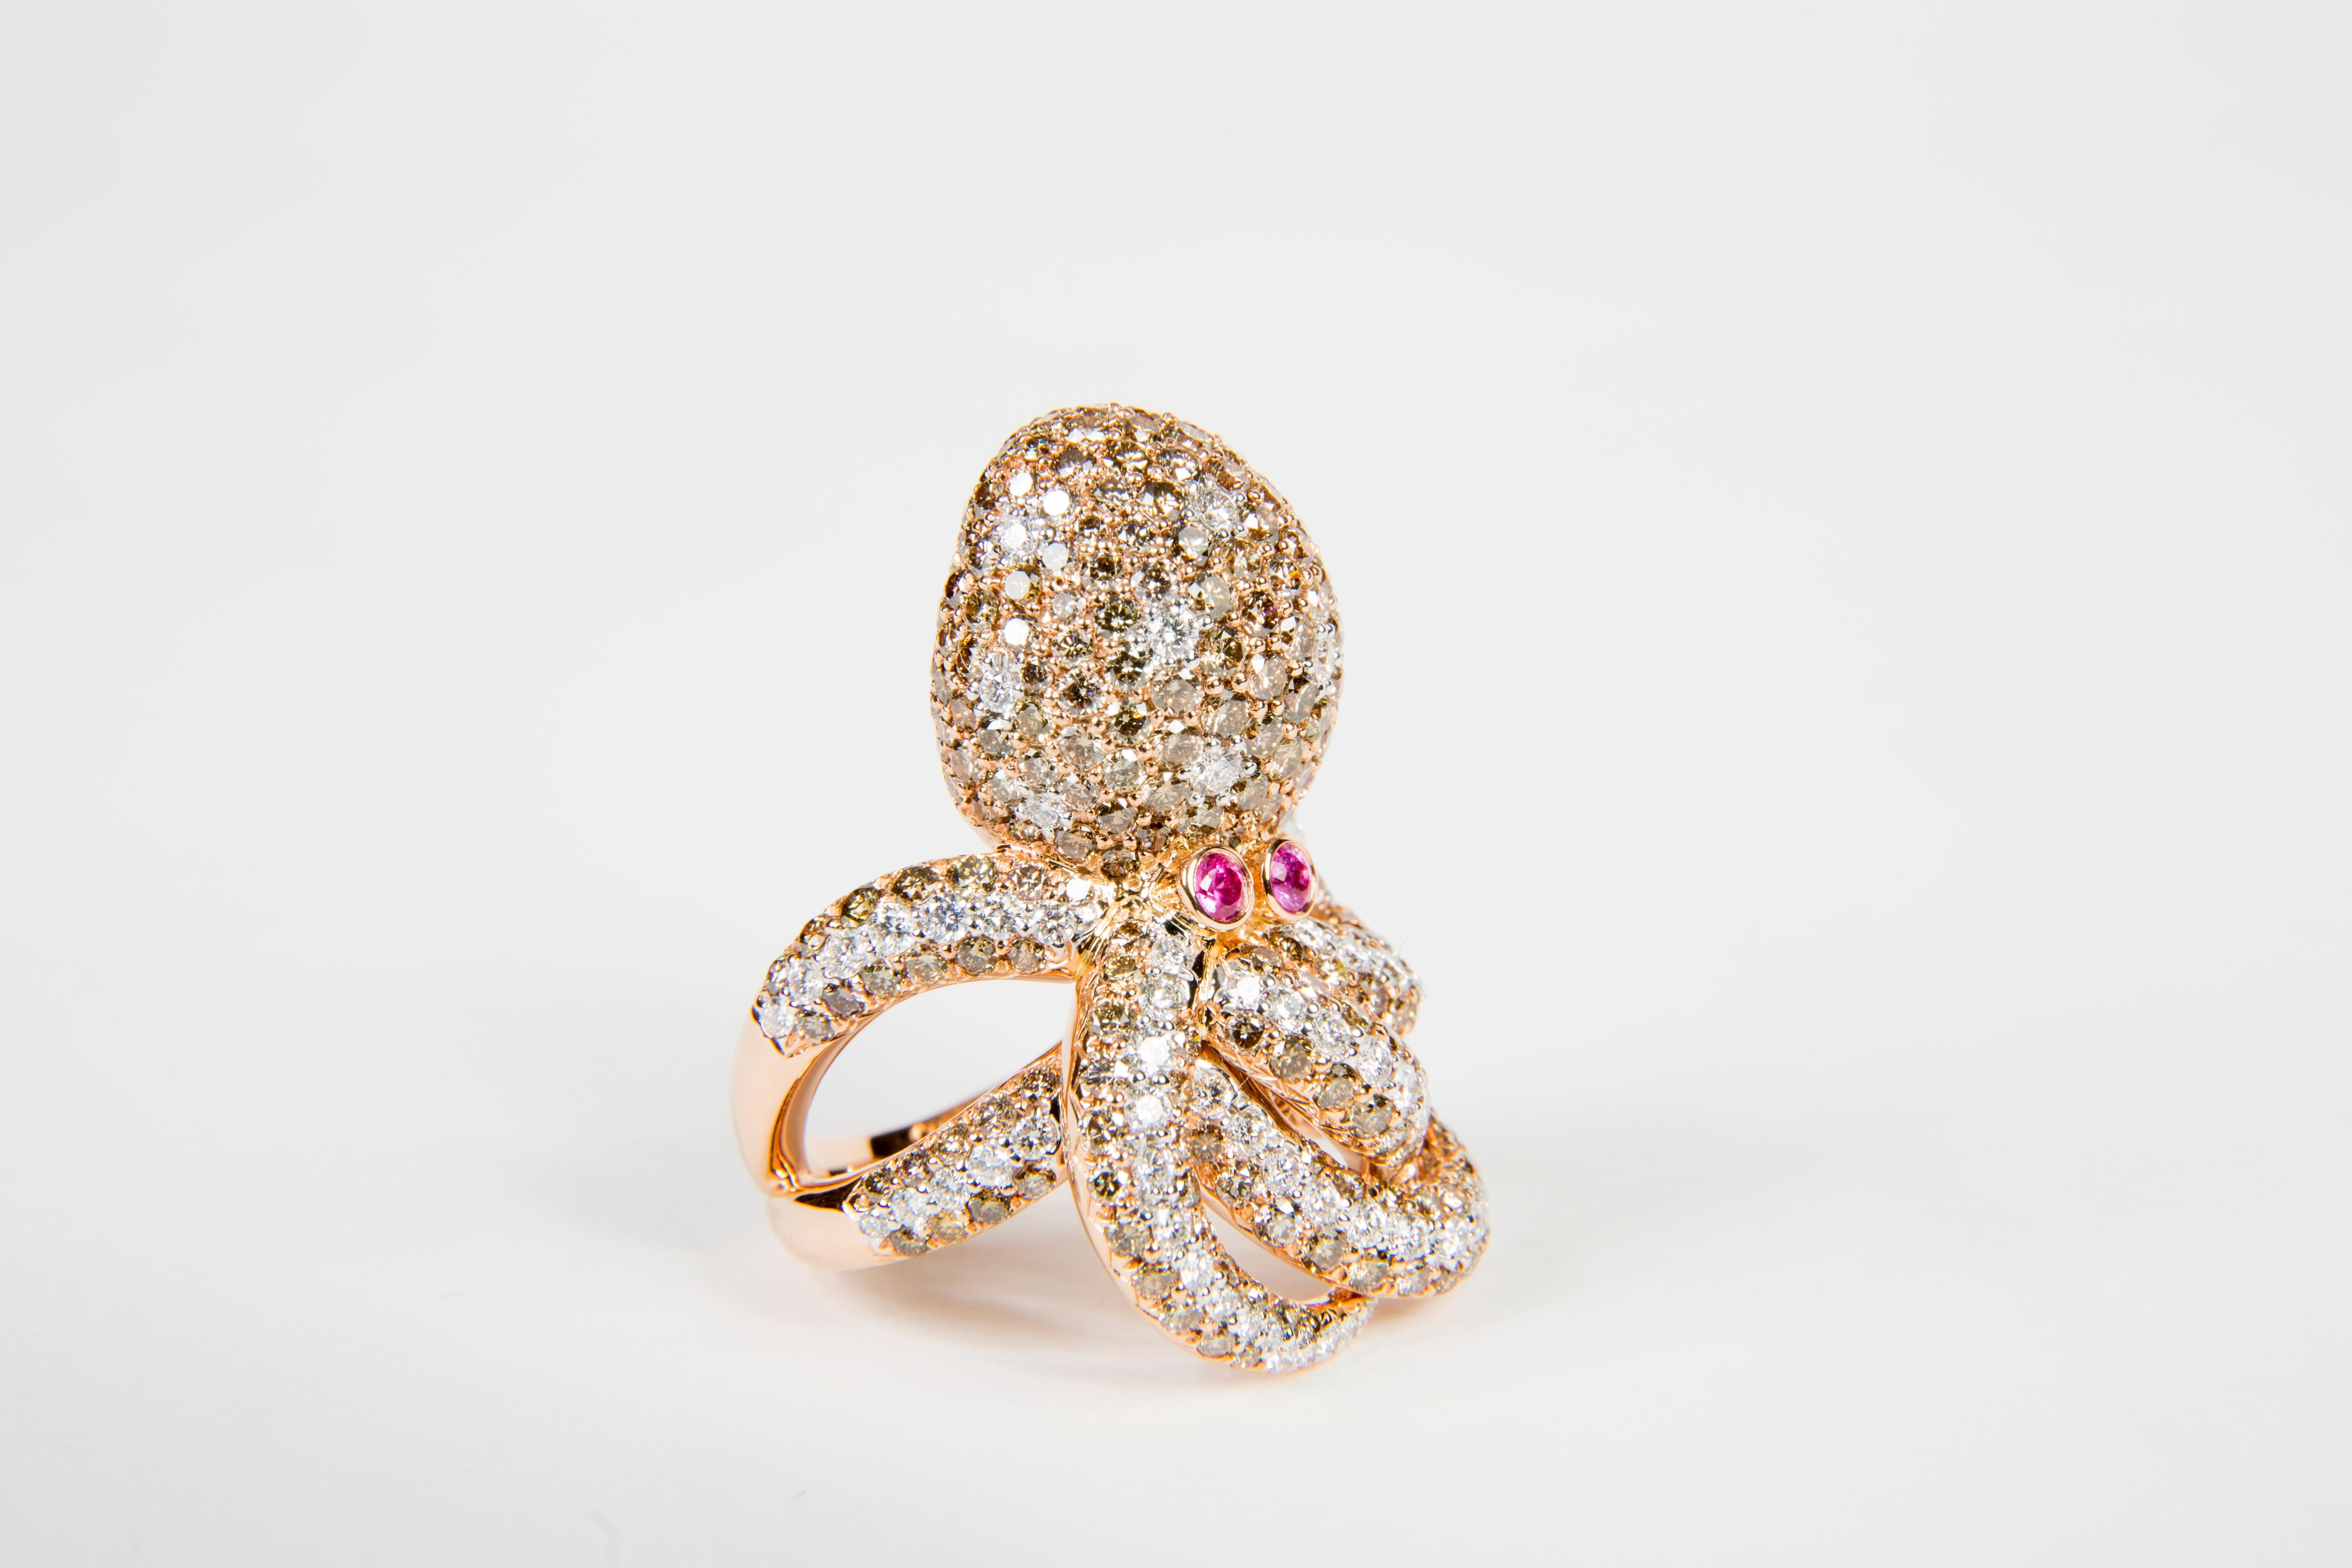 Contemporary 5.55ct Diamond and Pink Sapphire Octopus Shaped Cocktail Ring in 18K Rose Gold